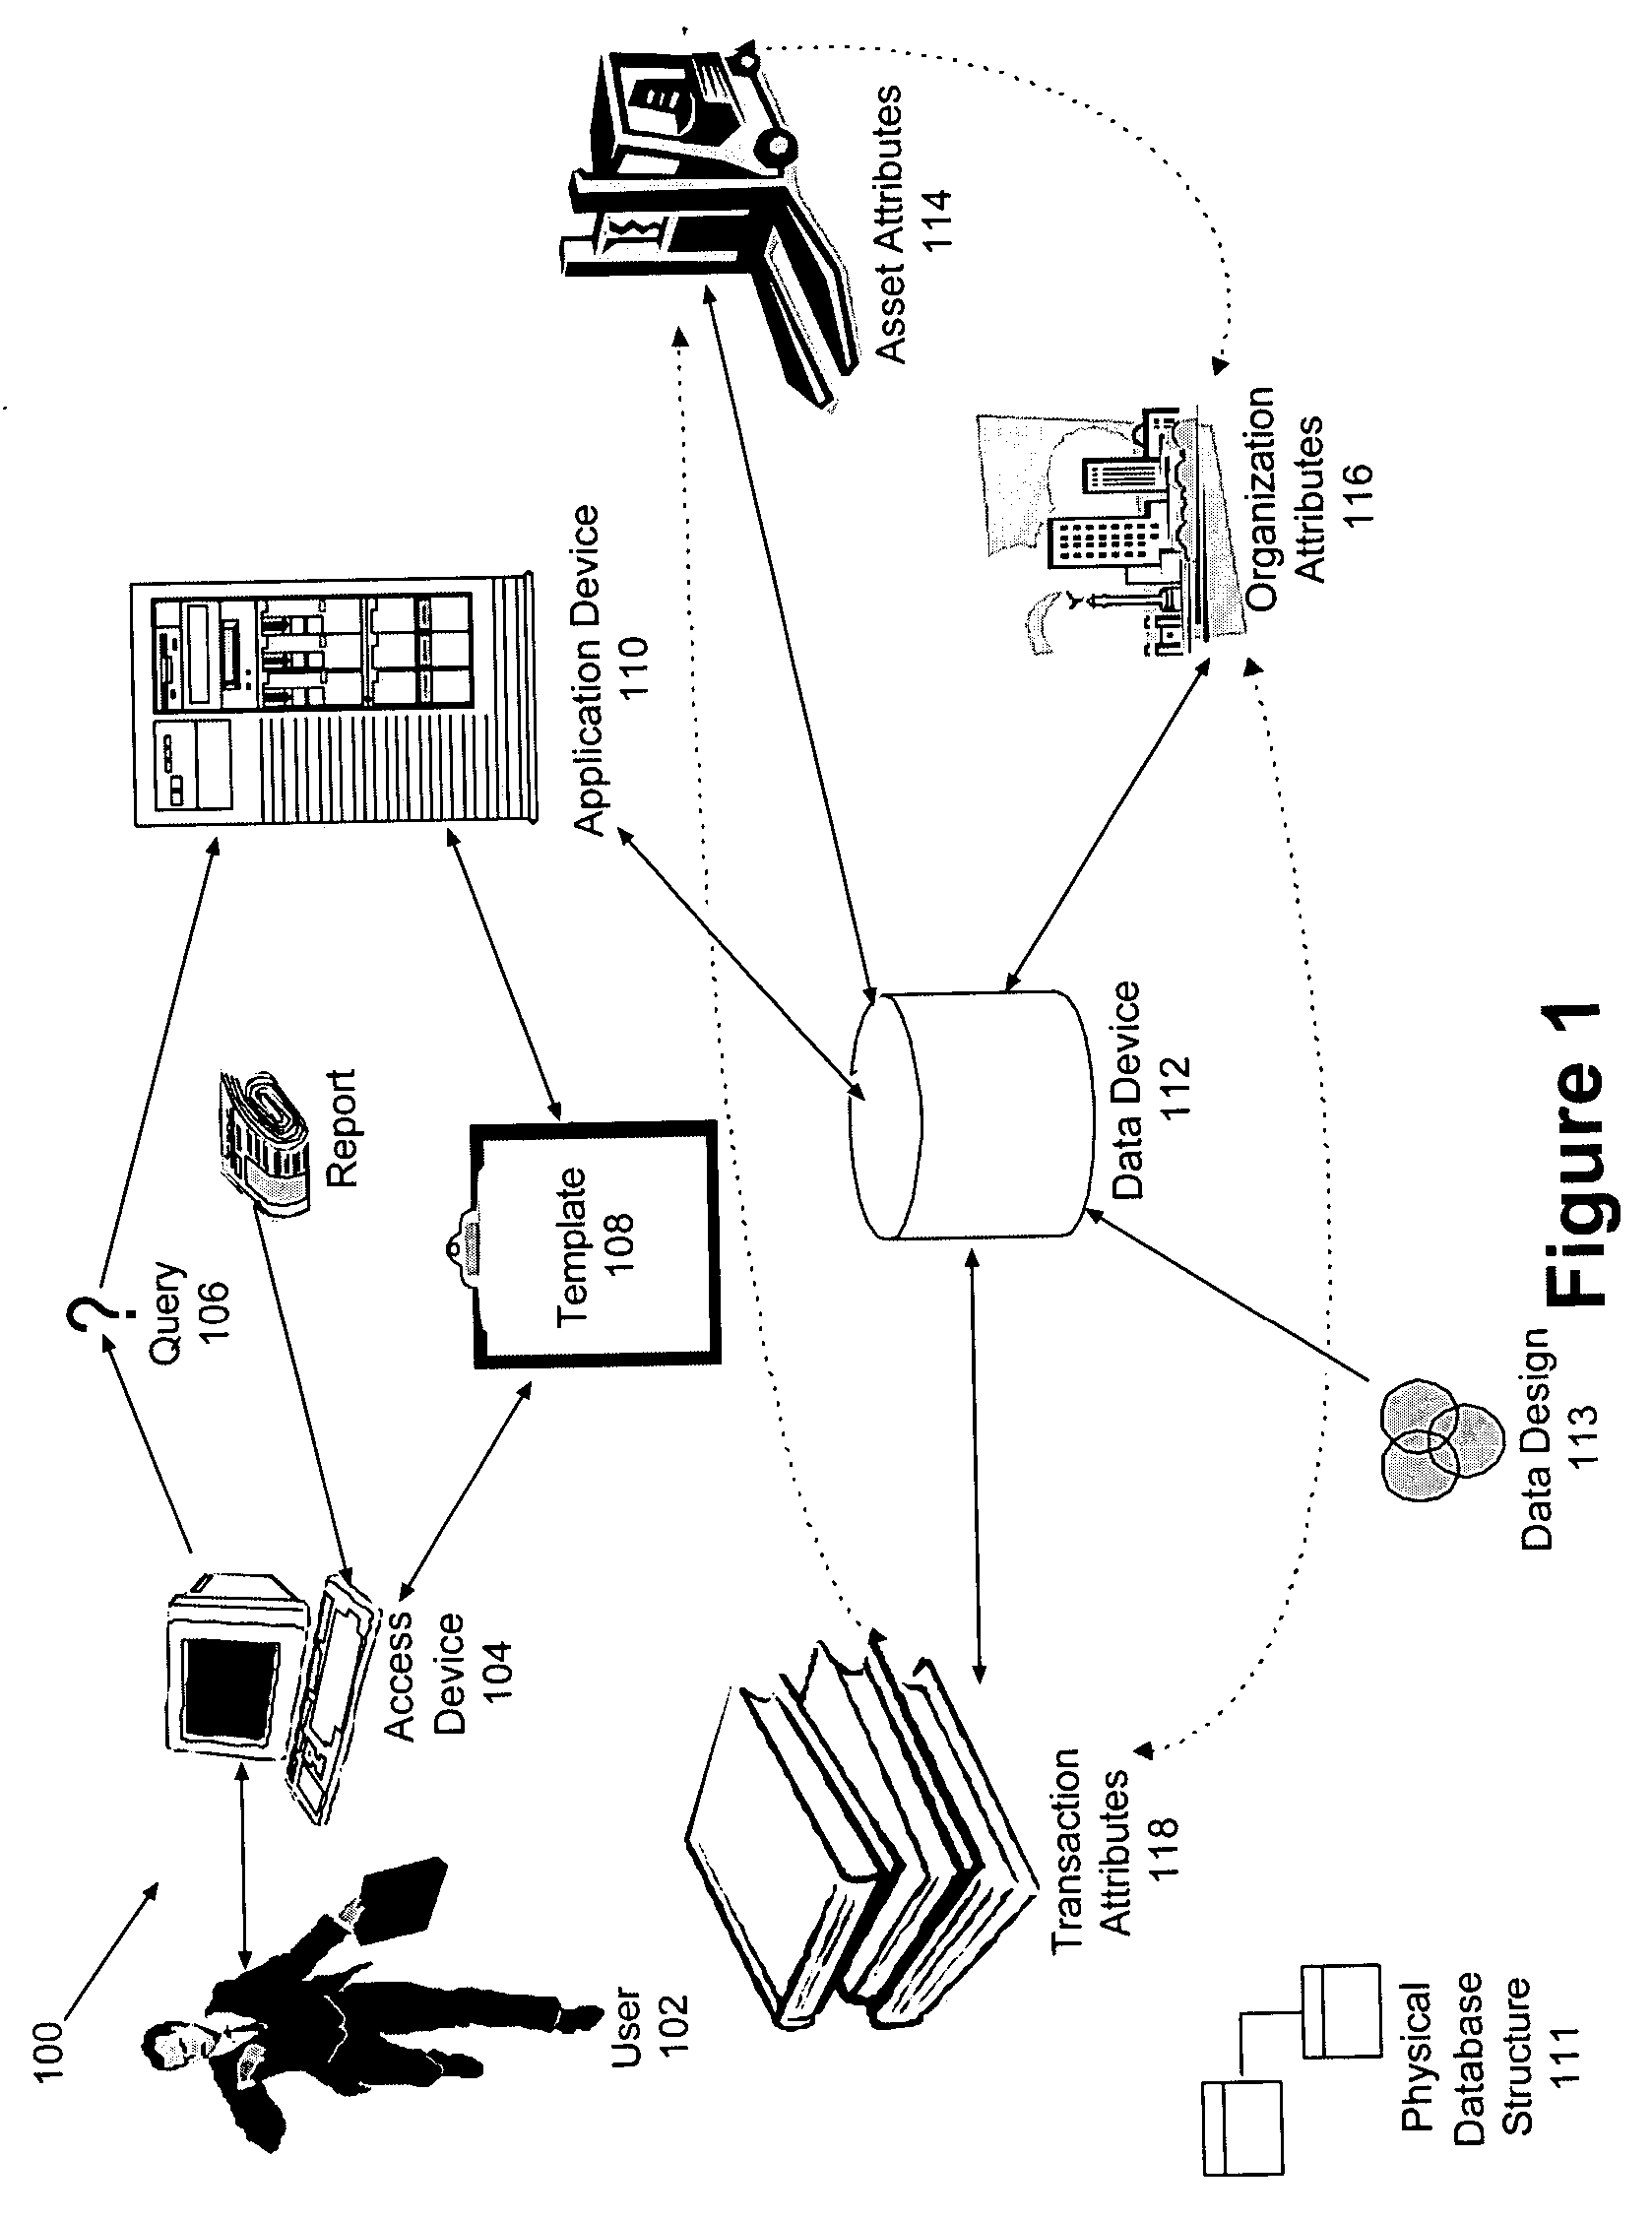 System or method for analyzing information organized in a configurable manner